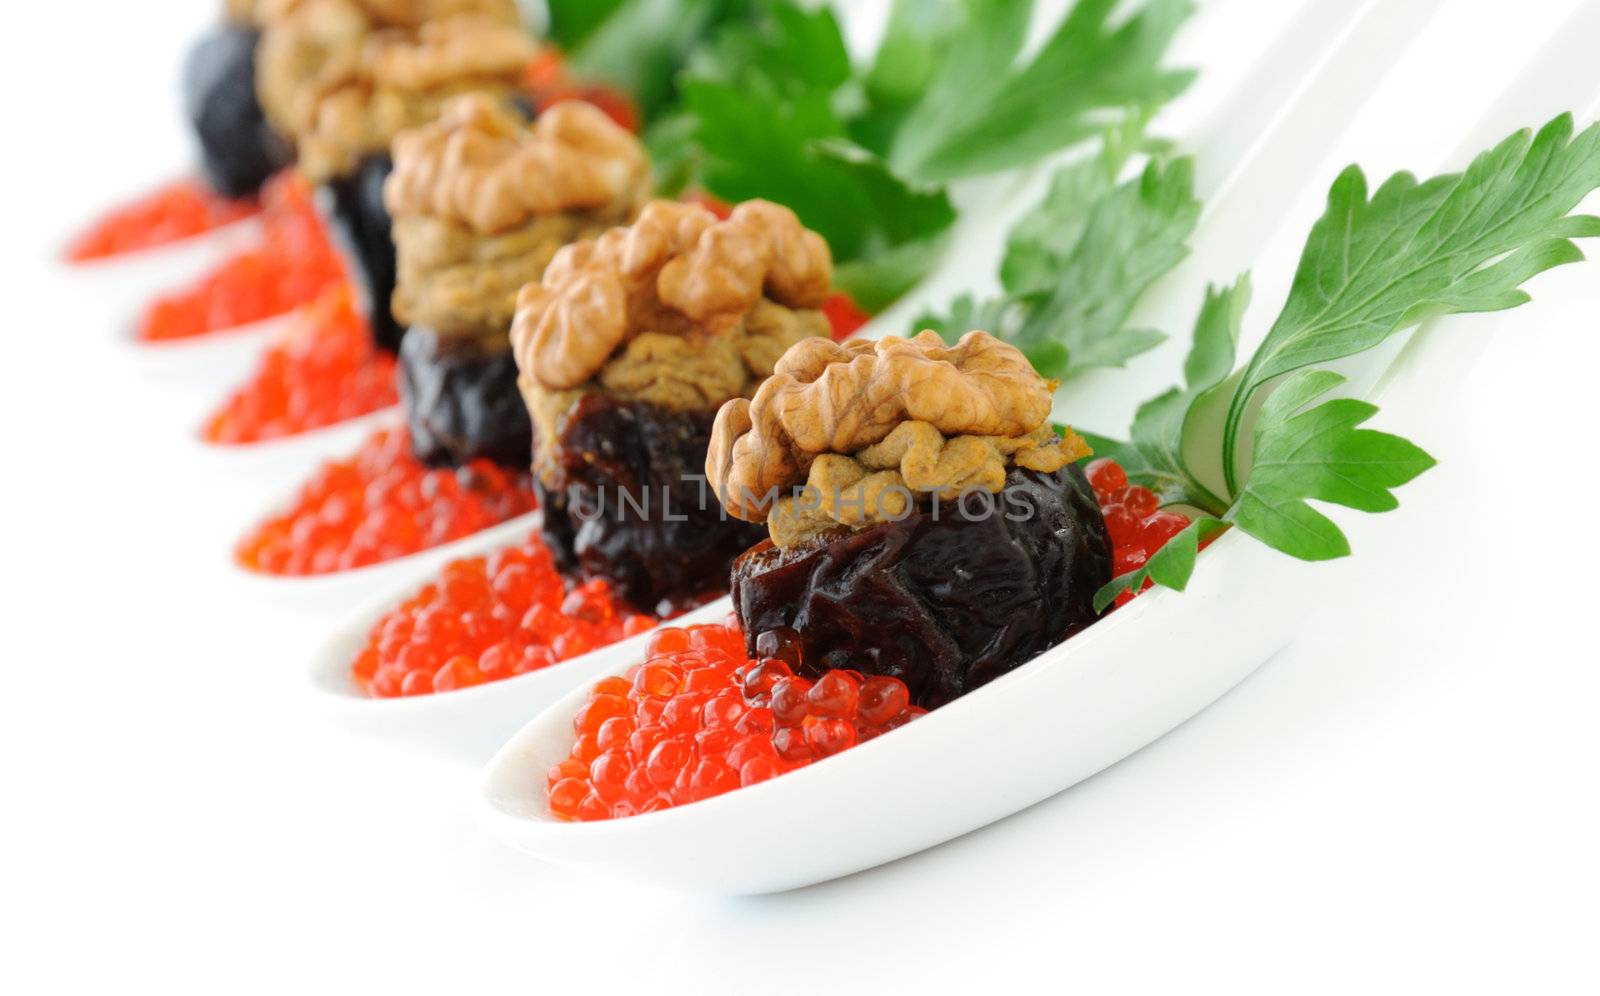 Prunes stuffed with liver pate with nuts in a red caviar by Apolonia